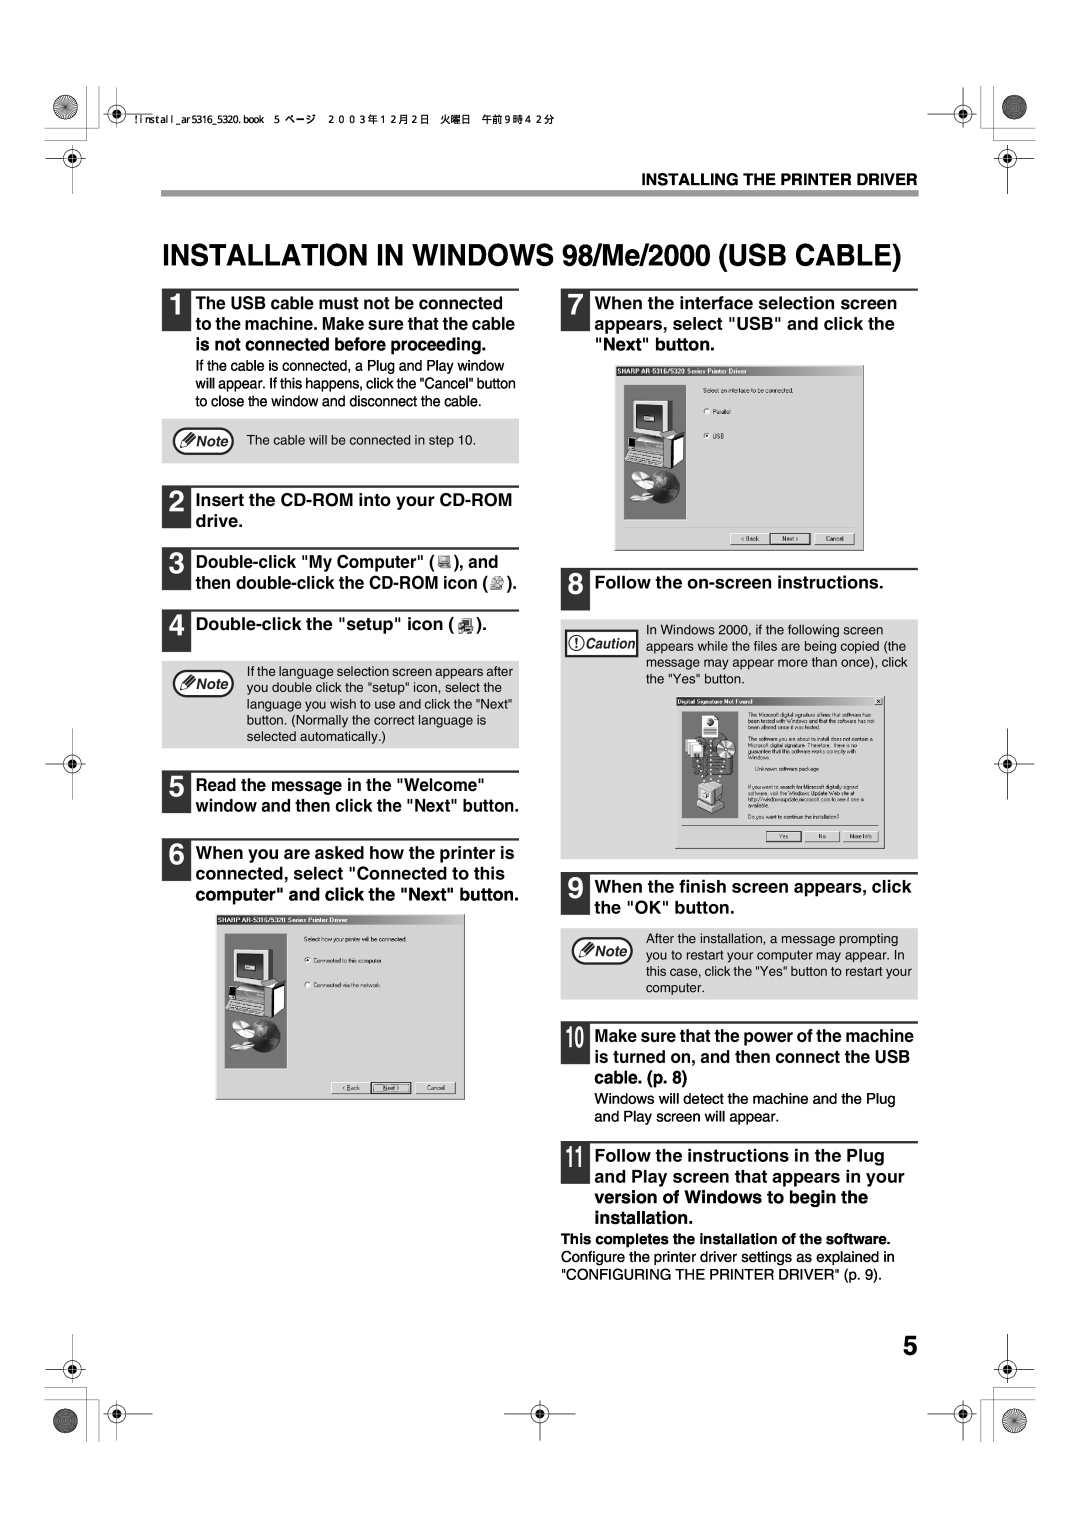 Sharp AR-5320 X, AR-5316 X setup guide 98/Me/2000 USB CABLE, Installation In Windows 